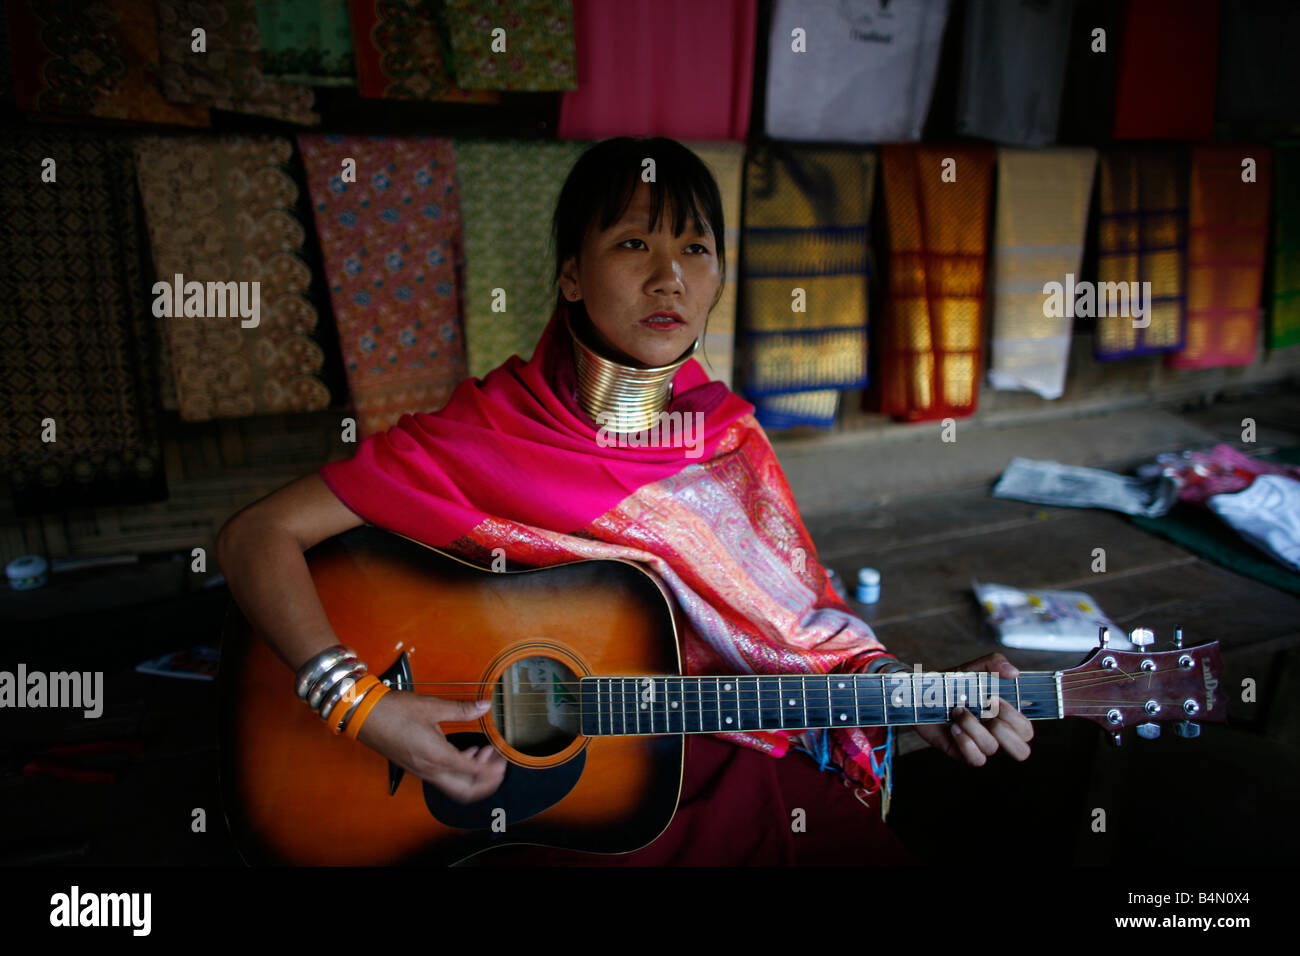 A Longneck woman plays a guitar Approximately 300 Burmese refugees in Thailand are members of the indigenous group known as the Longnecks The largest of the three villages where the Longnecks live is called Nai Soi located near Mae Hong Son City Longnecks wear metal rings on their necks which push the collarbone done and extend the neck They are a tourist attraction Tourists visit Nai Soi to take pictures of the Longnecks and buy their handicrafts The villages are criticized by human rights organizations as human zoos Stock Photo